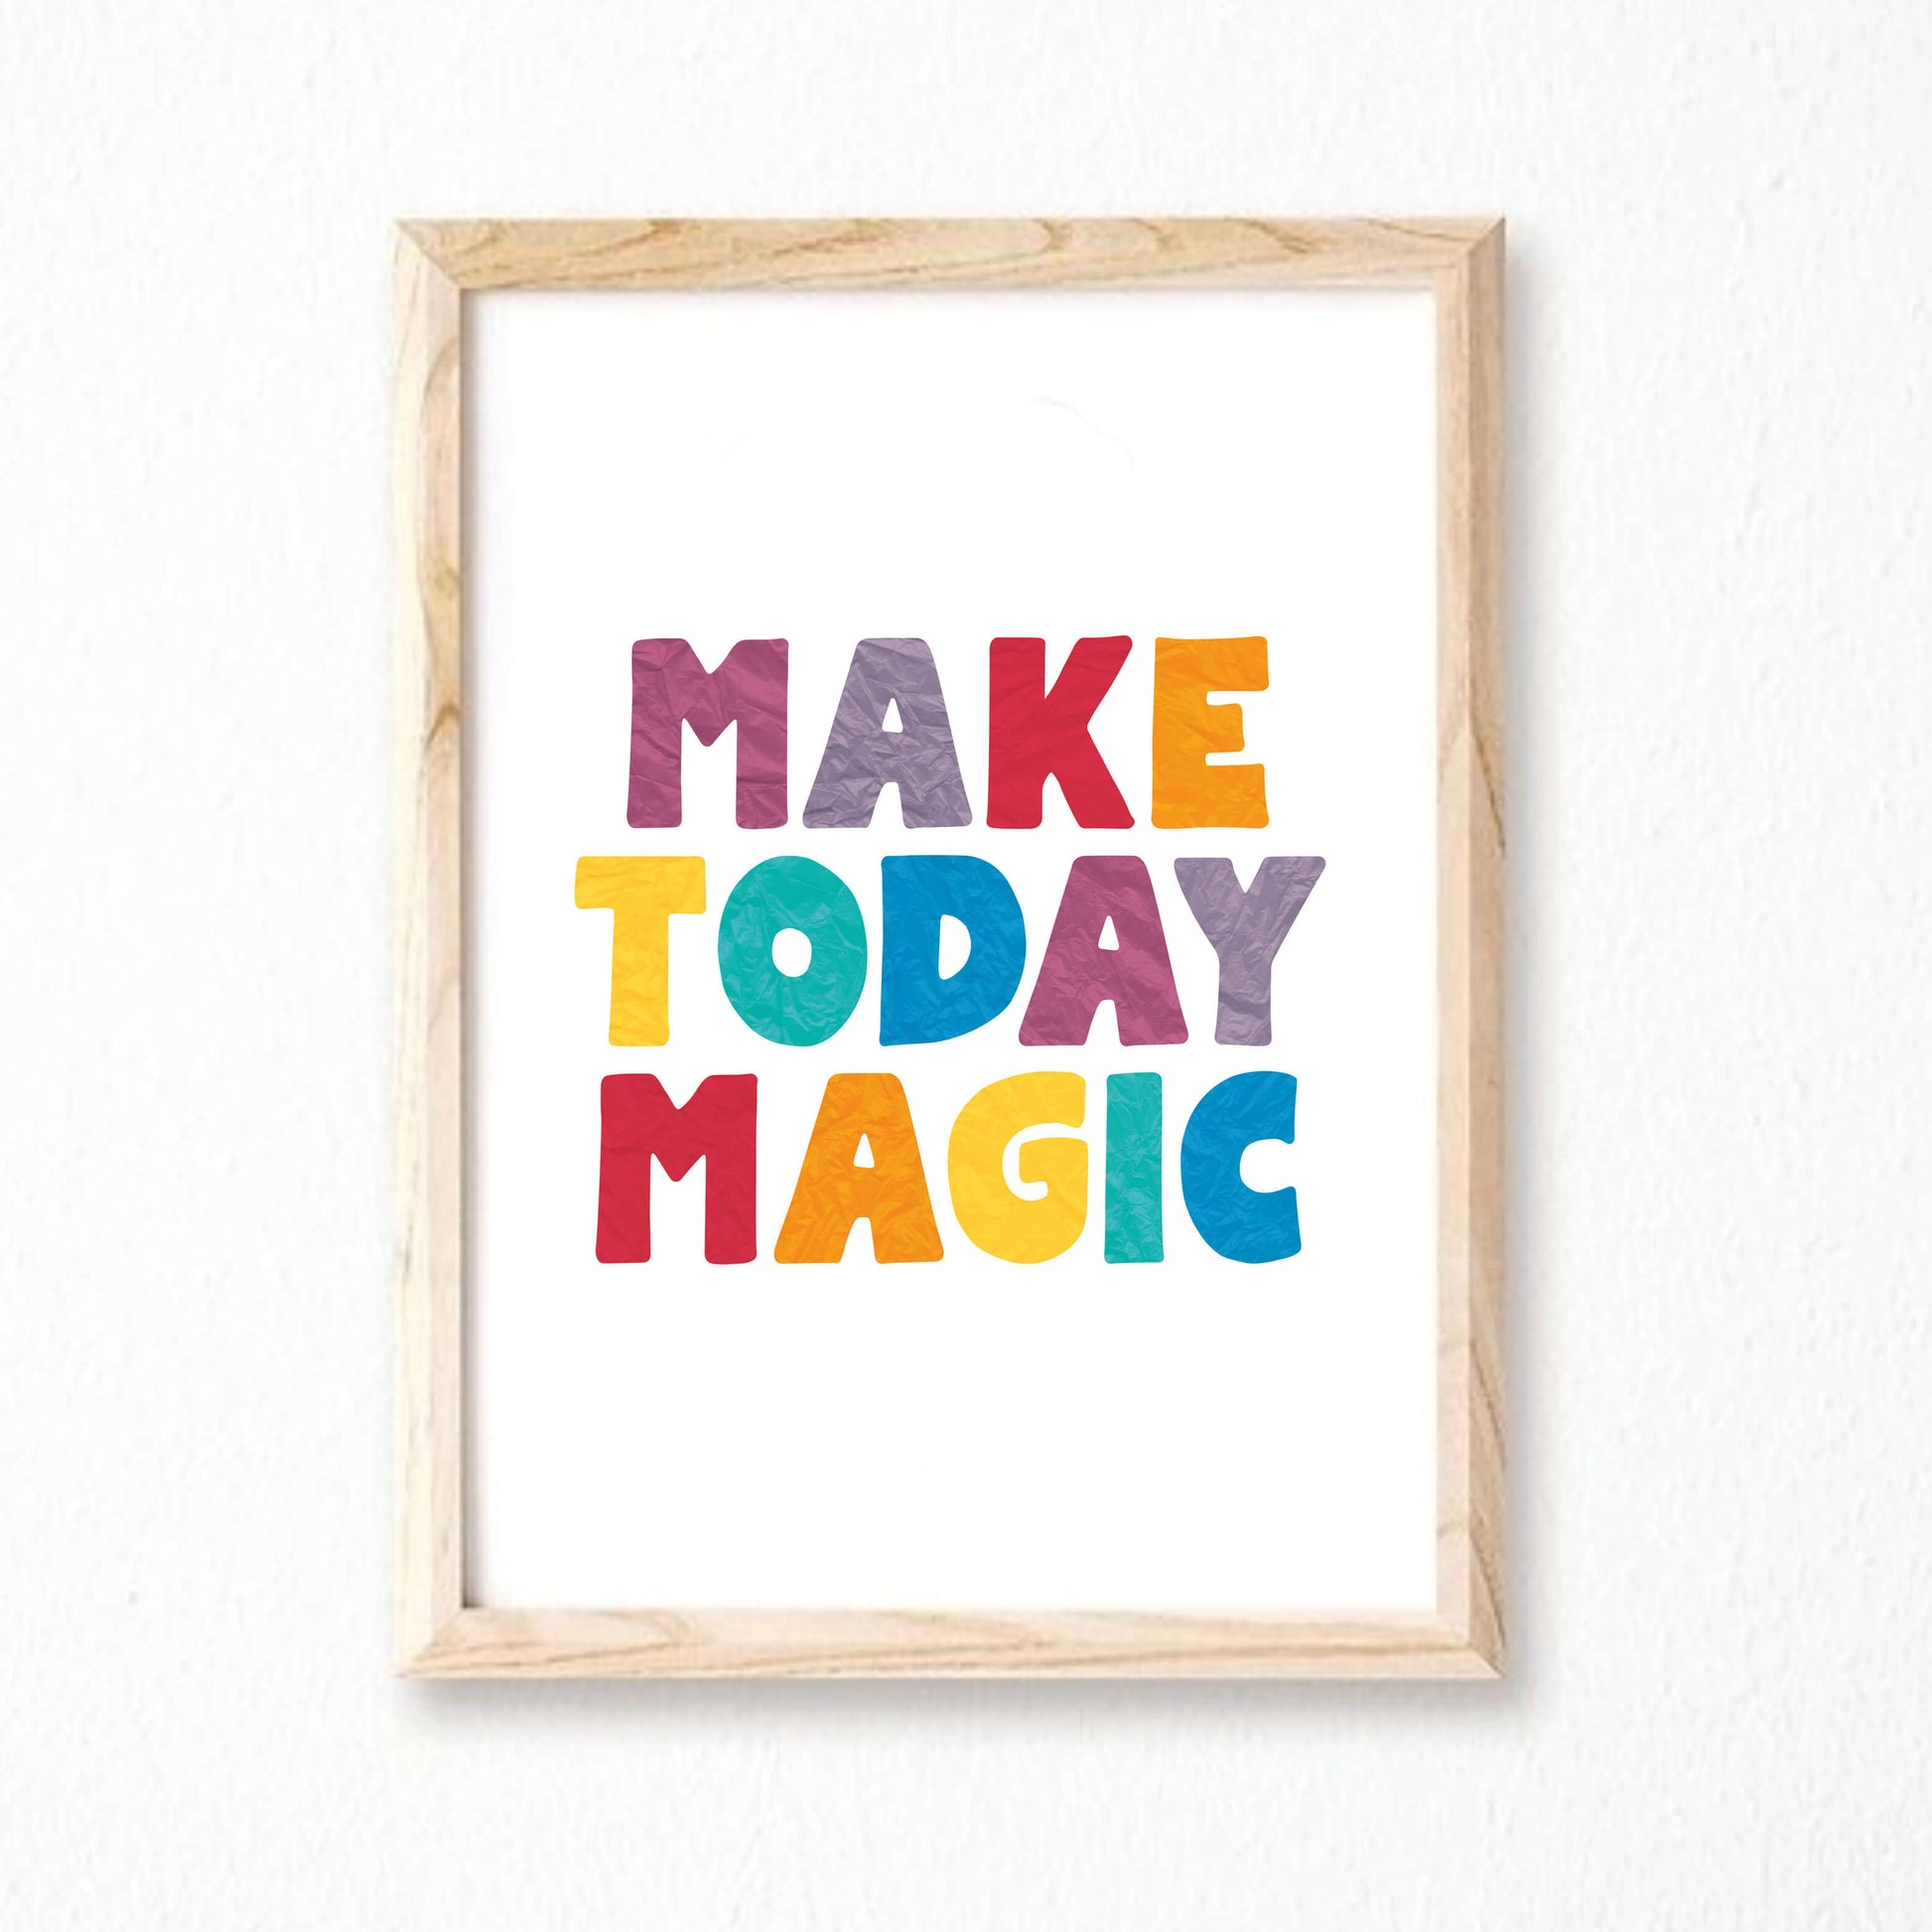 Make Today Magic Poster by SixElevenCreations. Product Code SEP0506